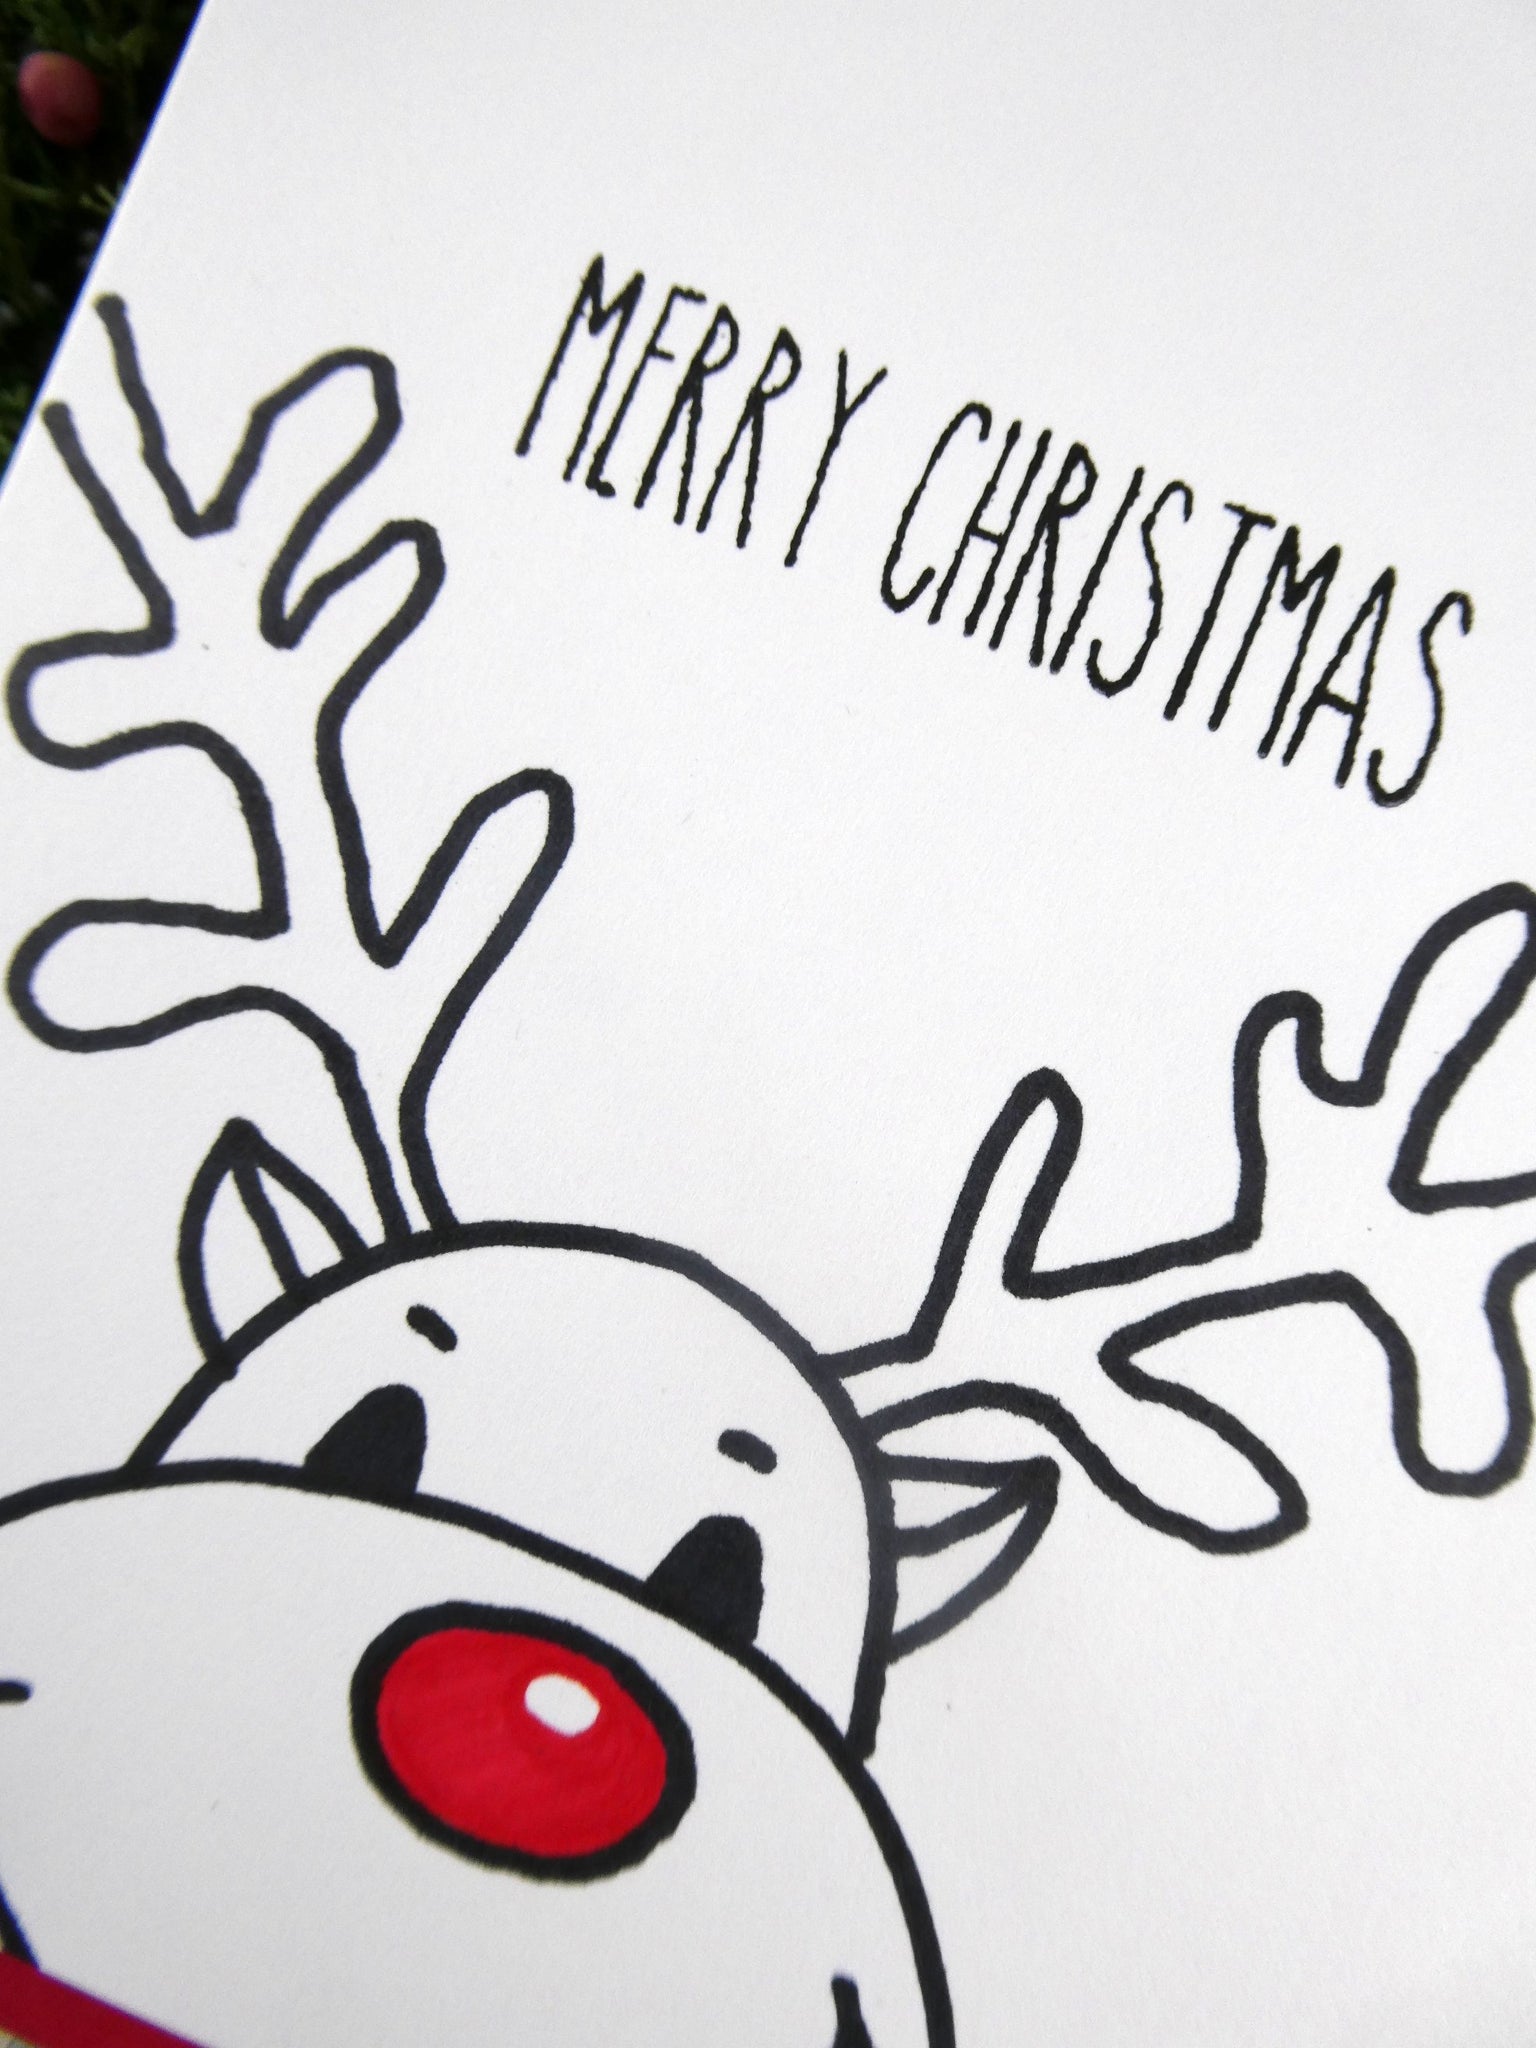 Christmas Card Drawing Ideas with XPPen - DIY Xmas Card! | XPPen